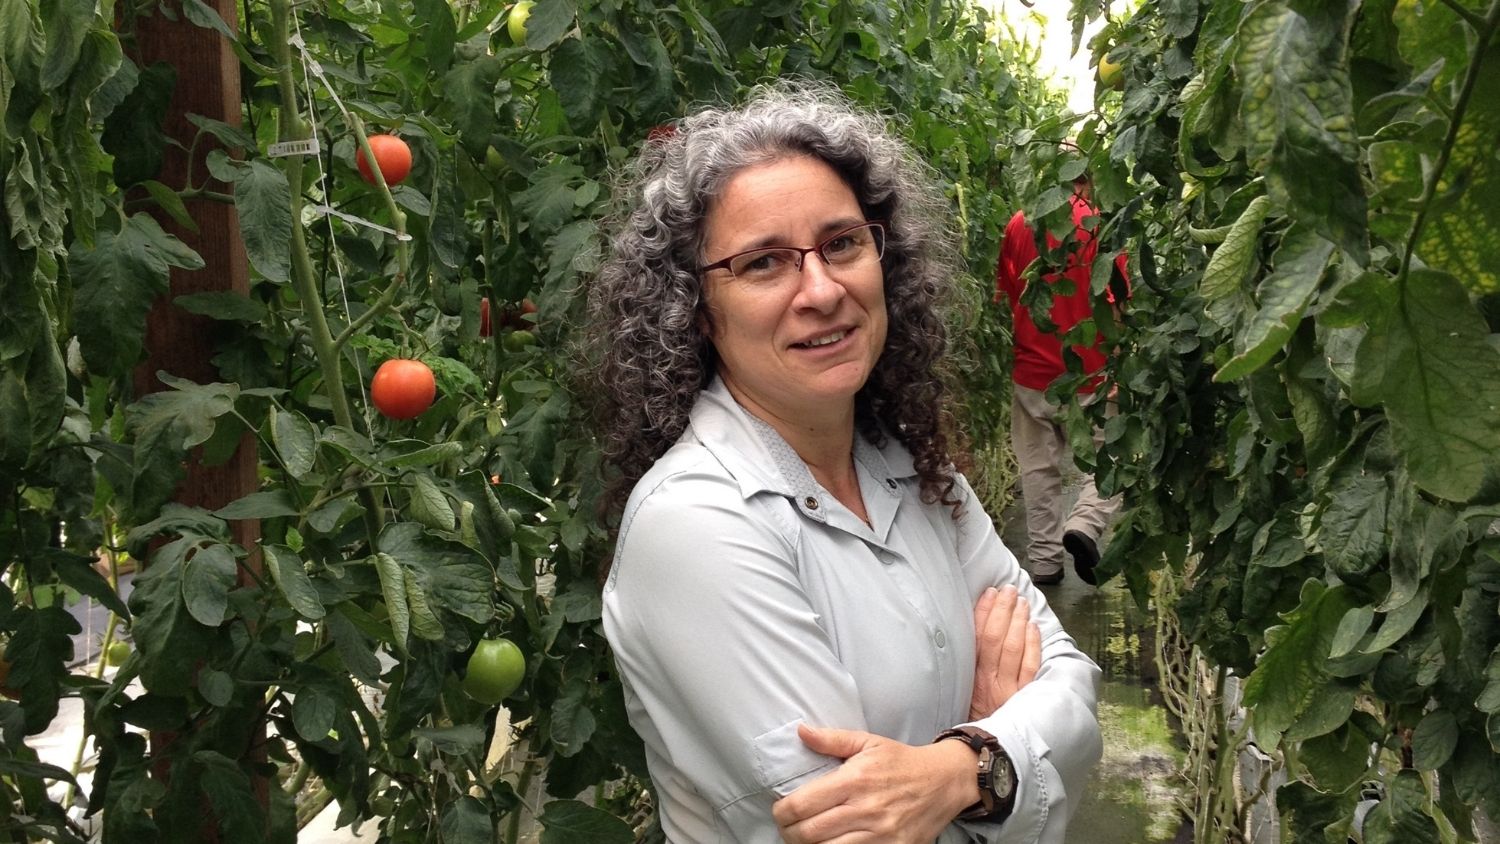 Professor Carla Barbieri is Supporting Small Farms through Agritourism, College of Natural Resources, Carla Barbieri at The Vollmer Farm in NC, feature